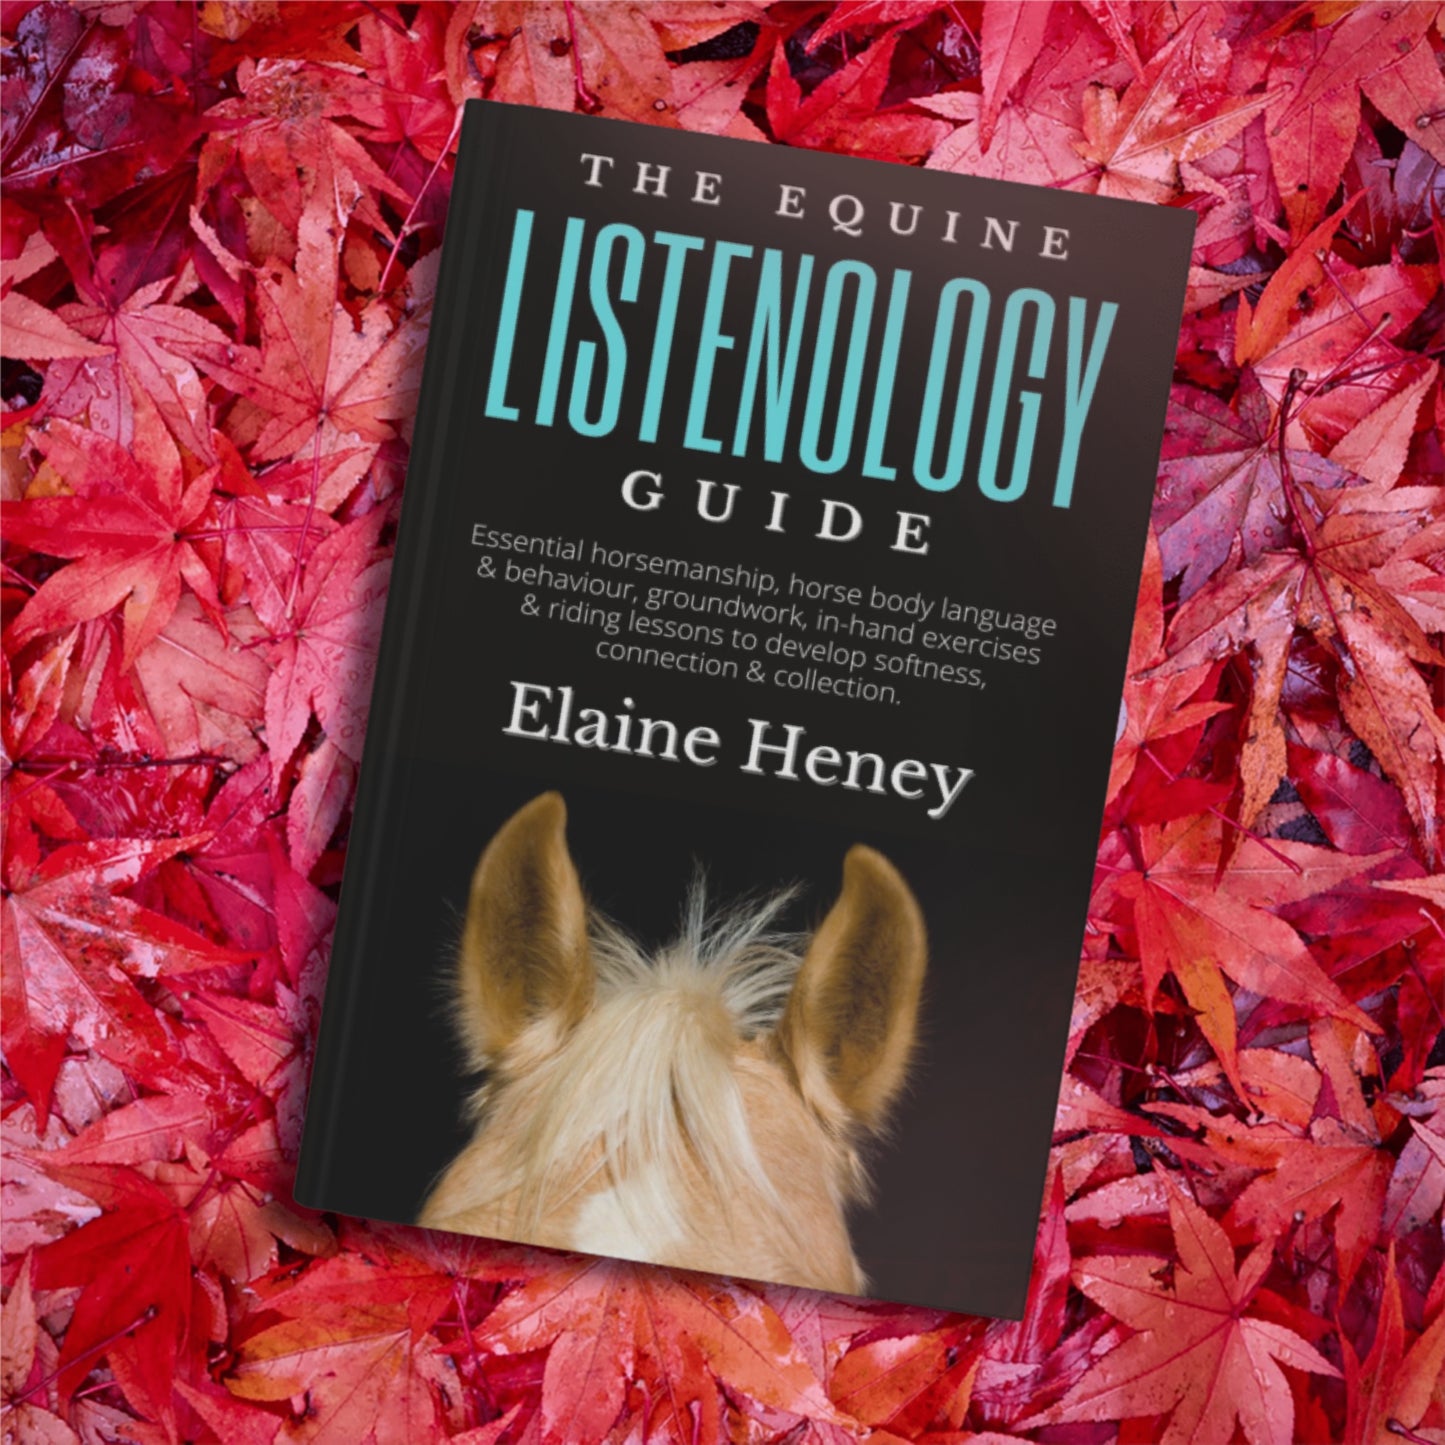 The Equine Listenology Guide - Essential horsemanship, horse body language & behaviour, groundwork, in-hand exercises & riding lessons